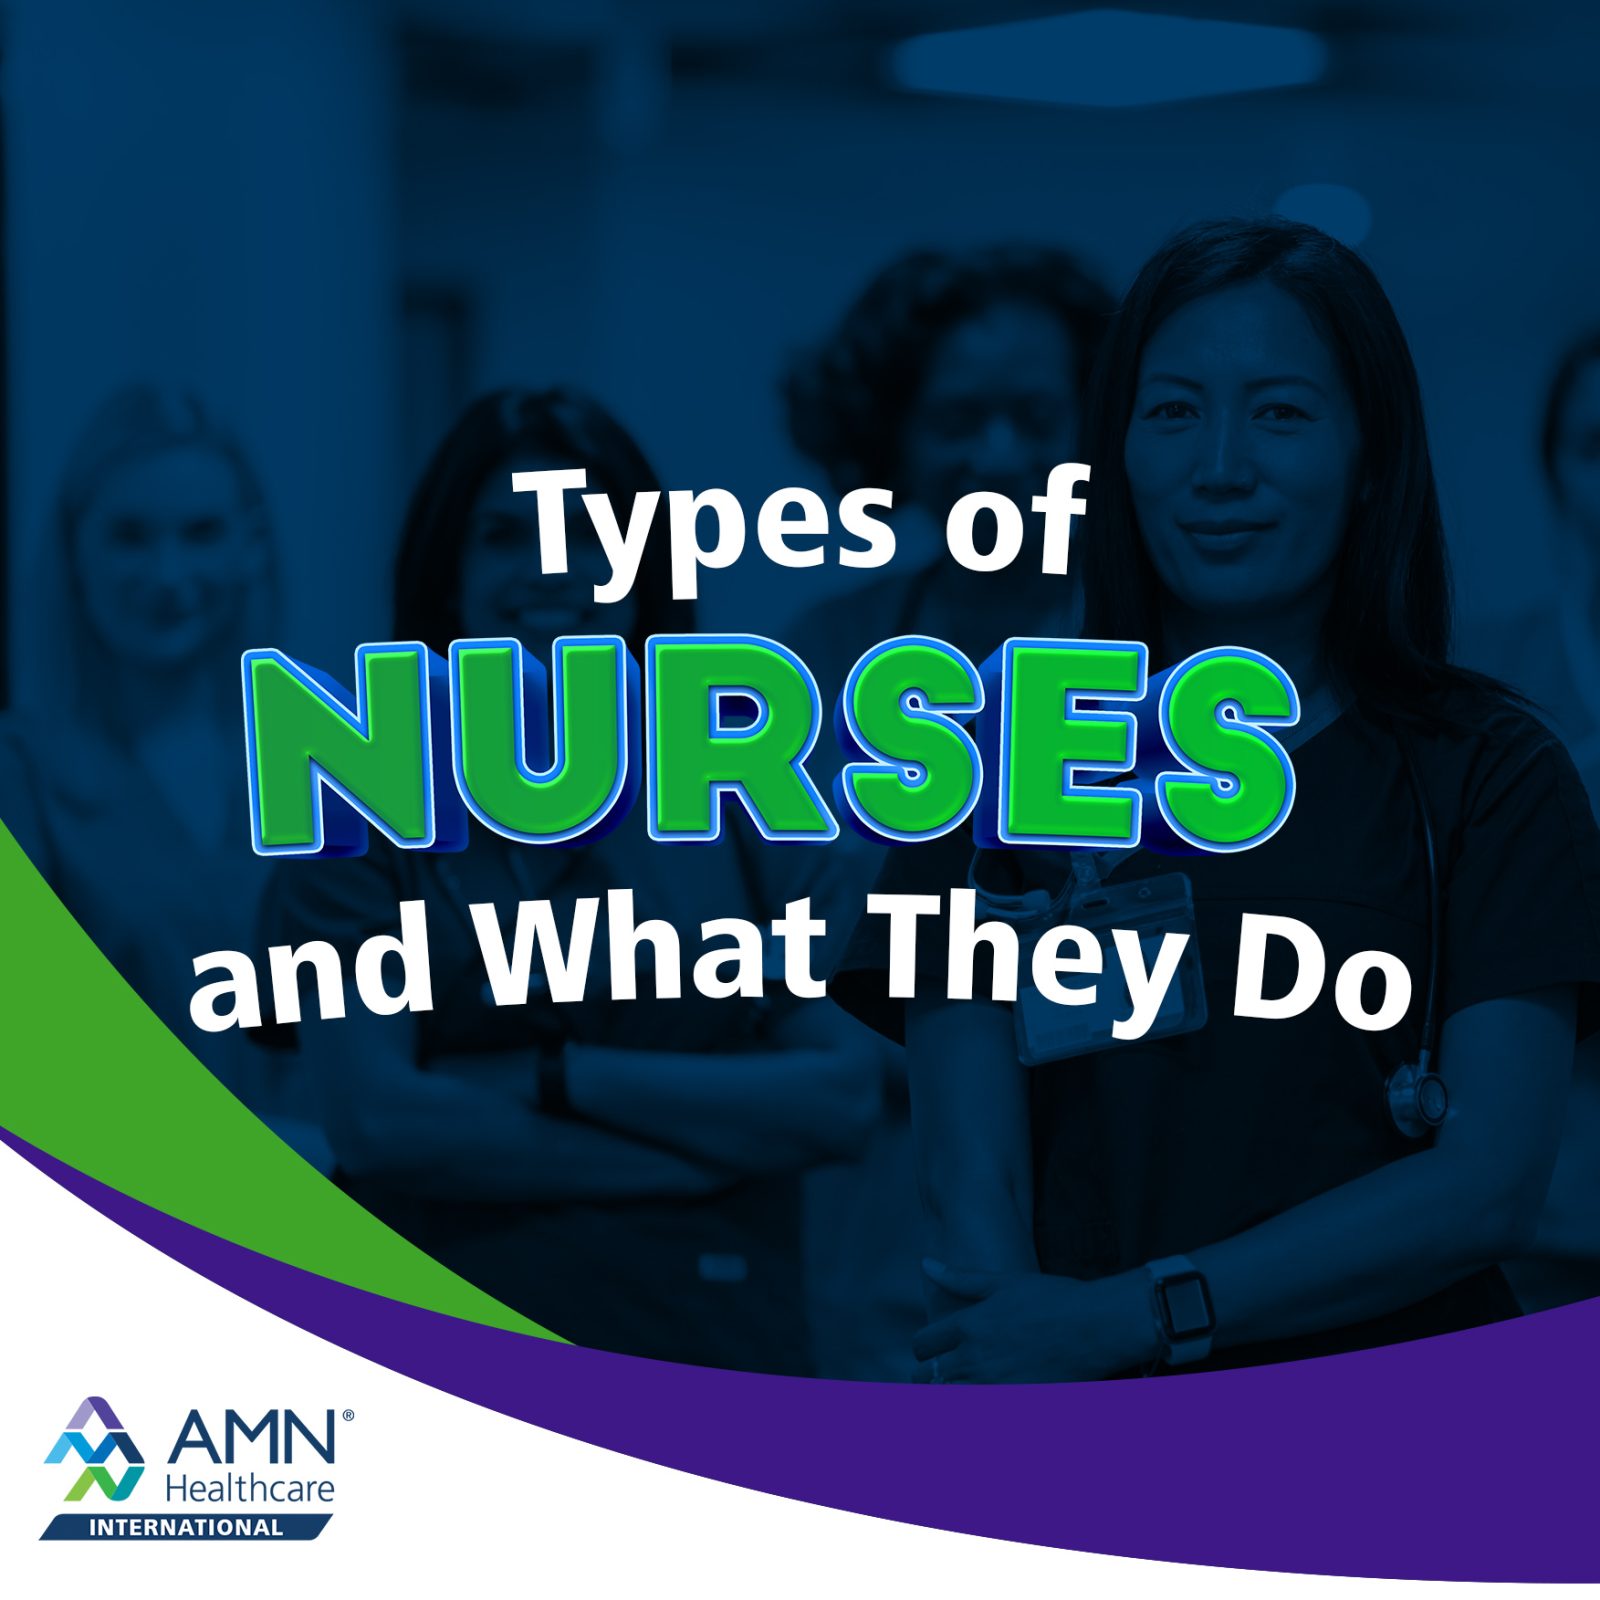 Understanding the Types of Nurses and What They Do